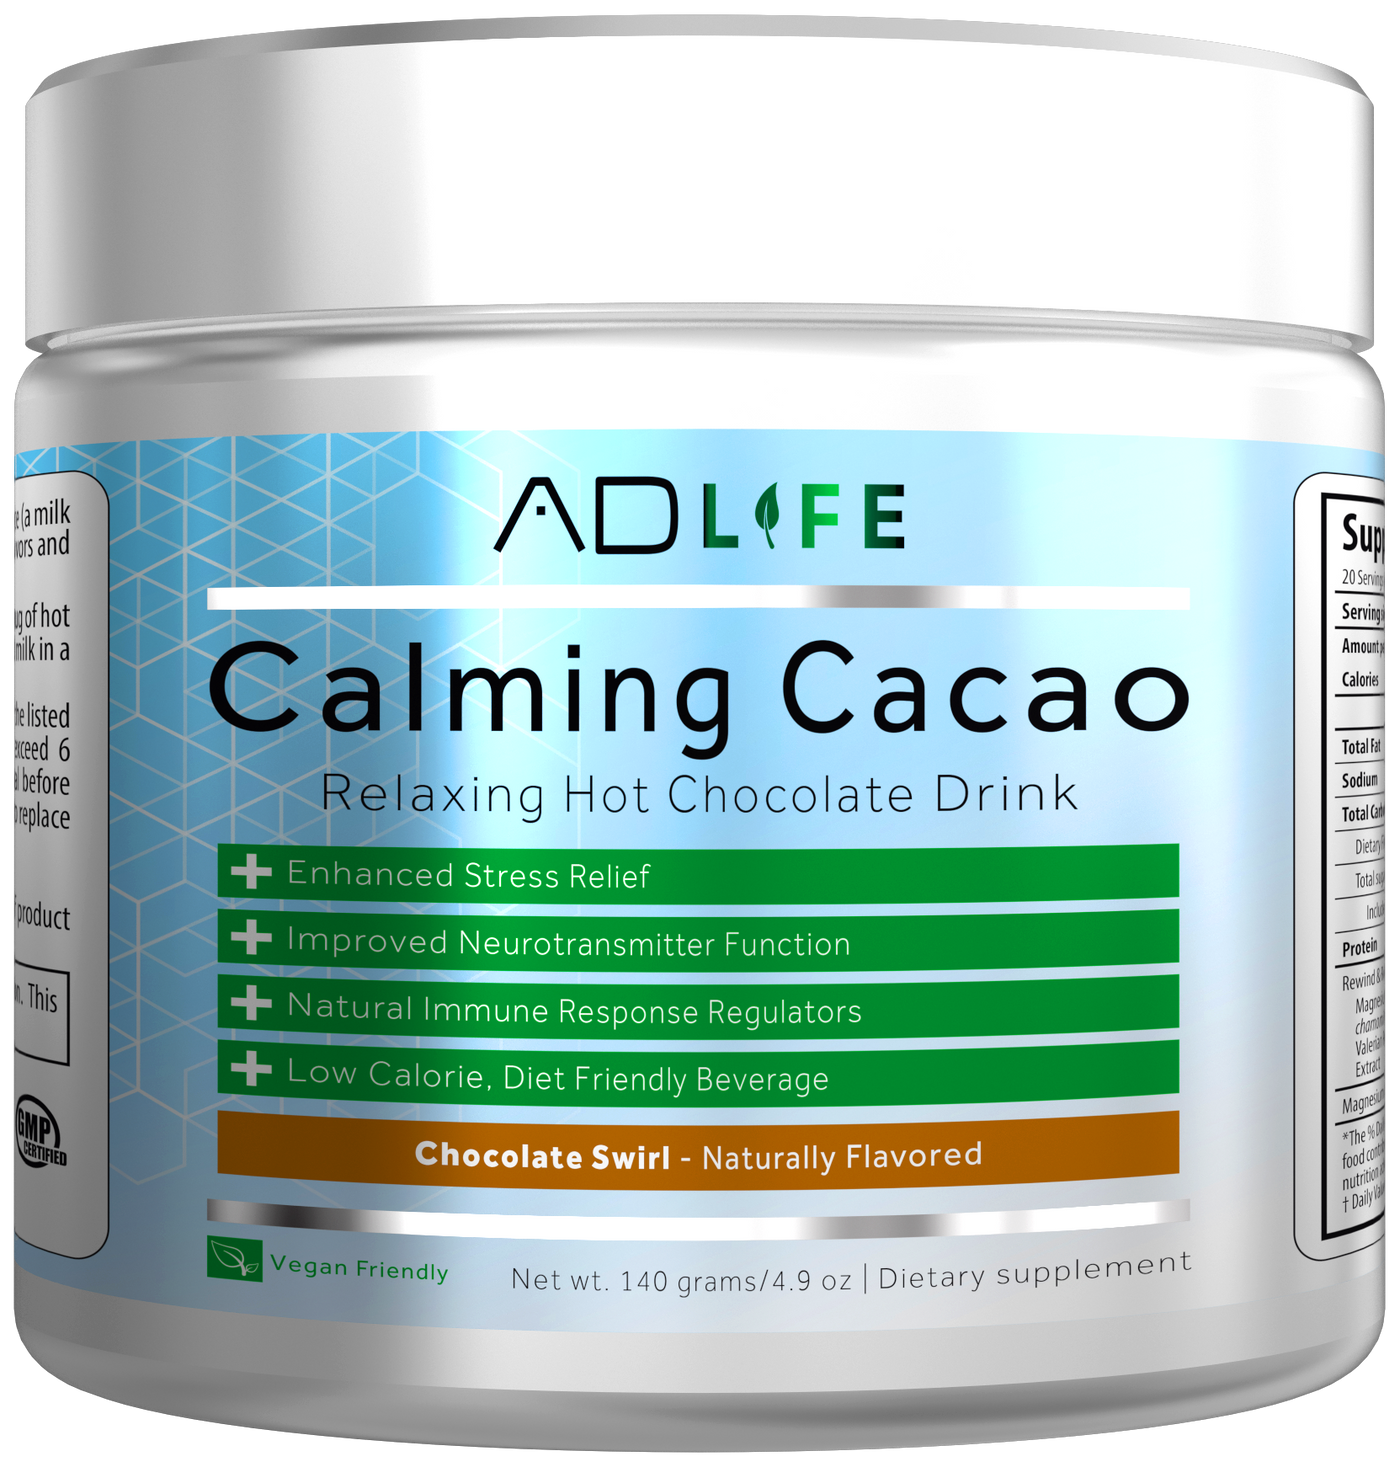 Project AD | Calming Cacao